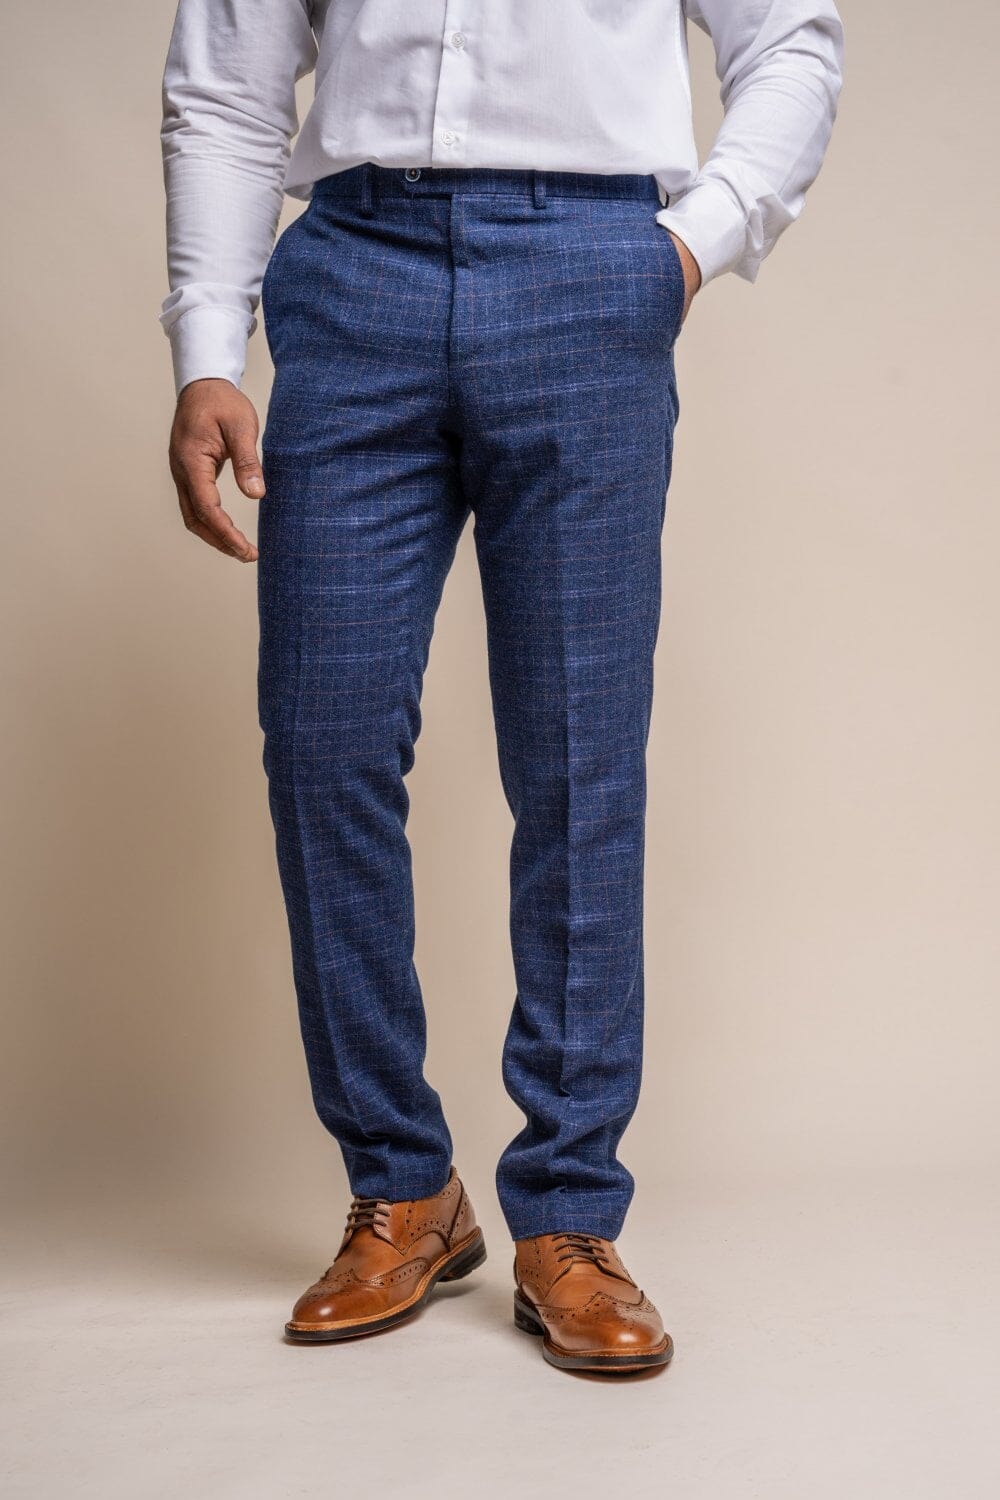 Crosshatch Tweed Blue Check Trousers - STOCK CLEARANCE - Trousers - - THREADPEPPER